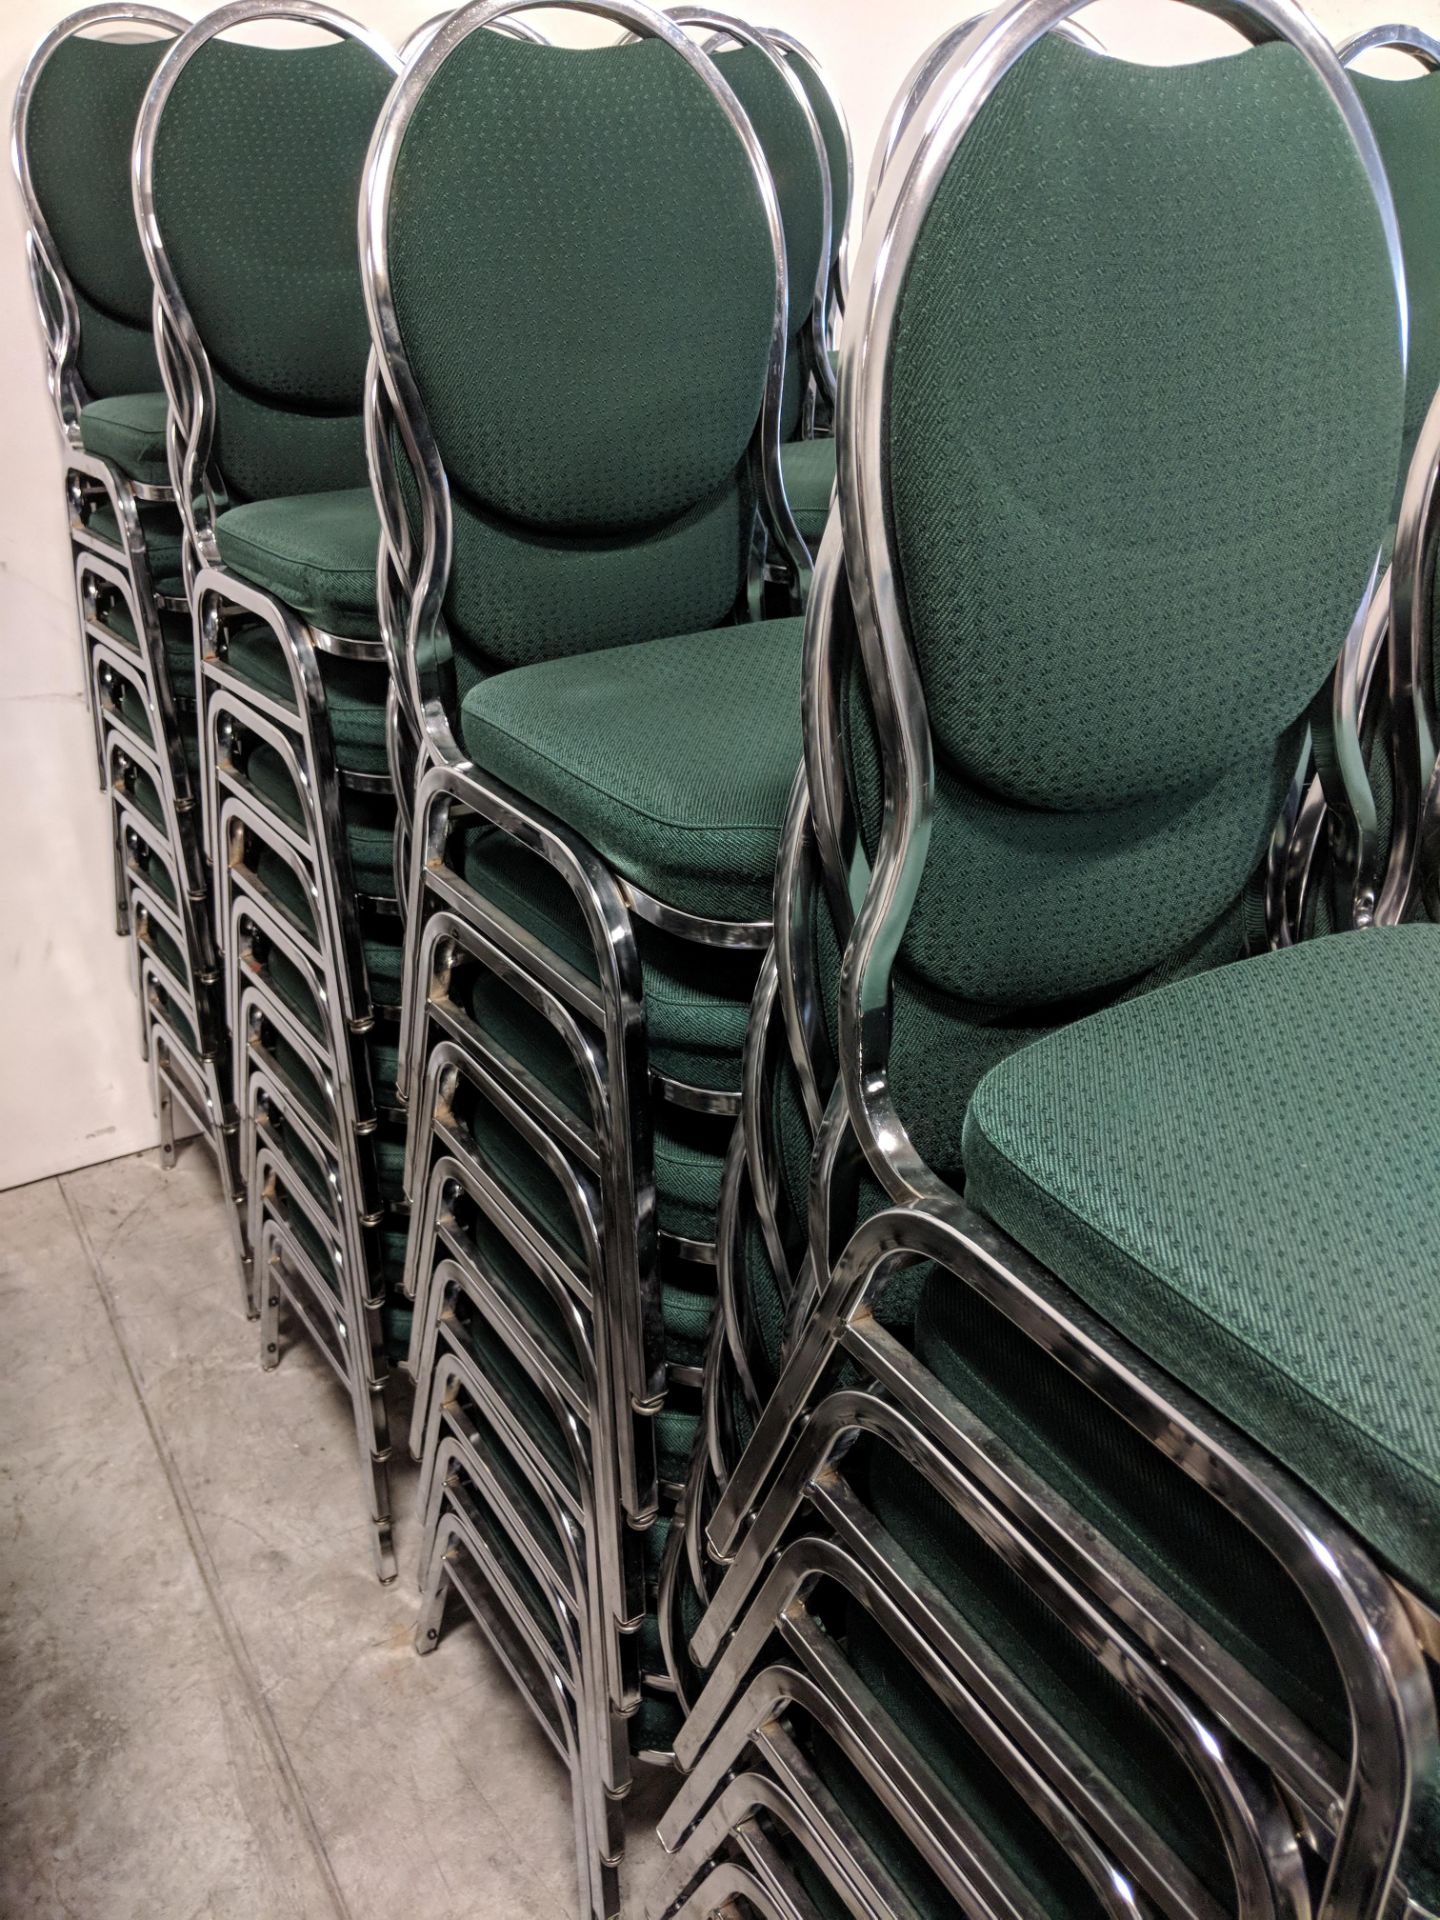 Green Stacking Chairs - Lot of 105 - Image 3 of 8